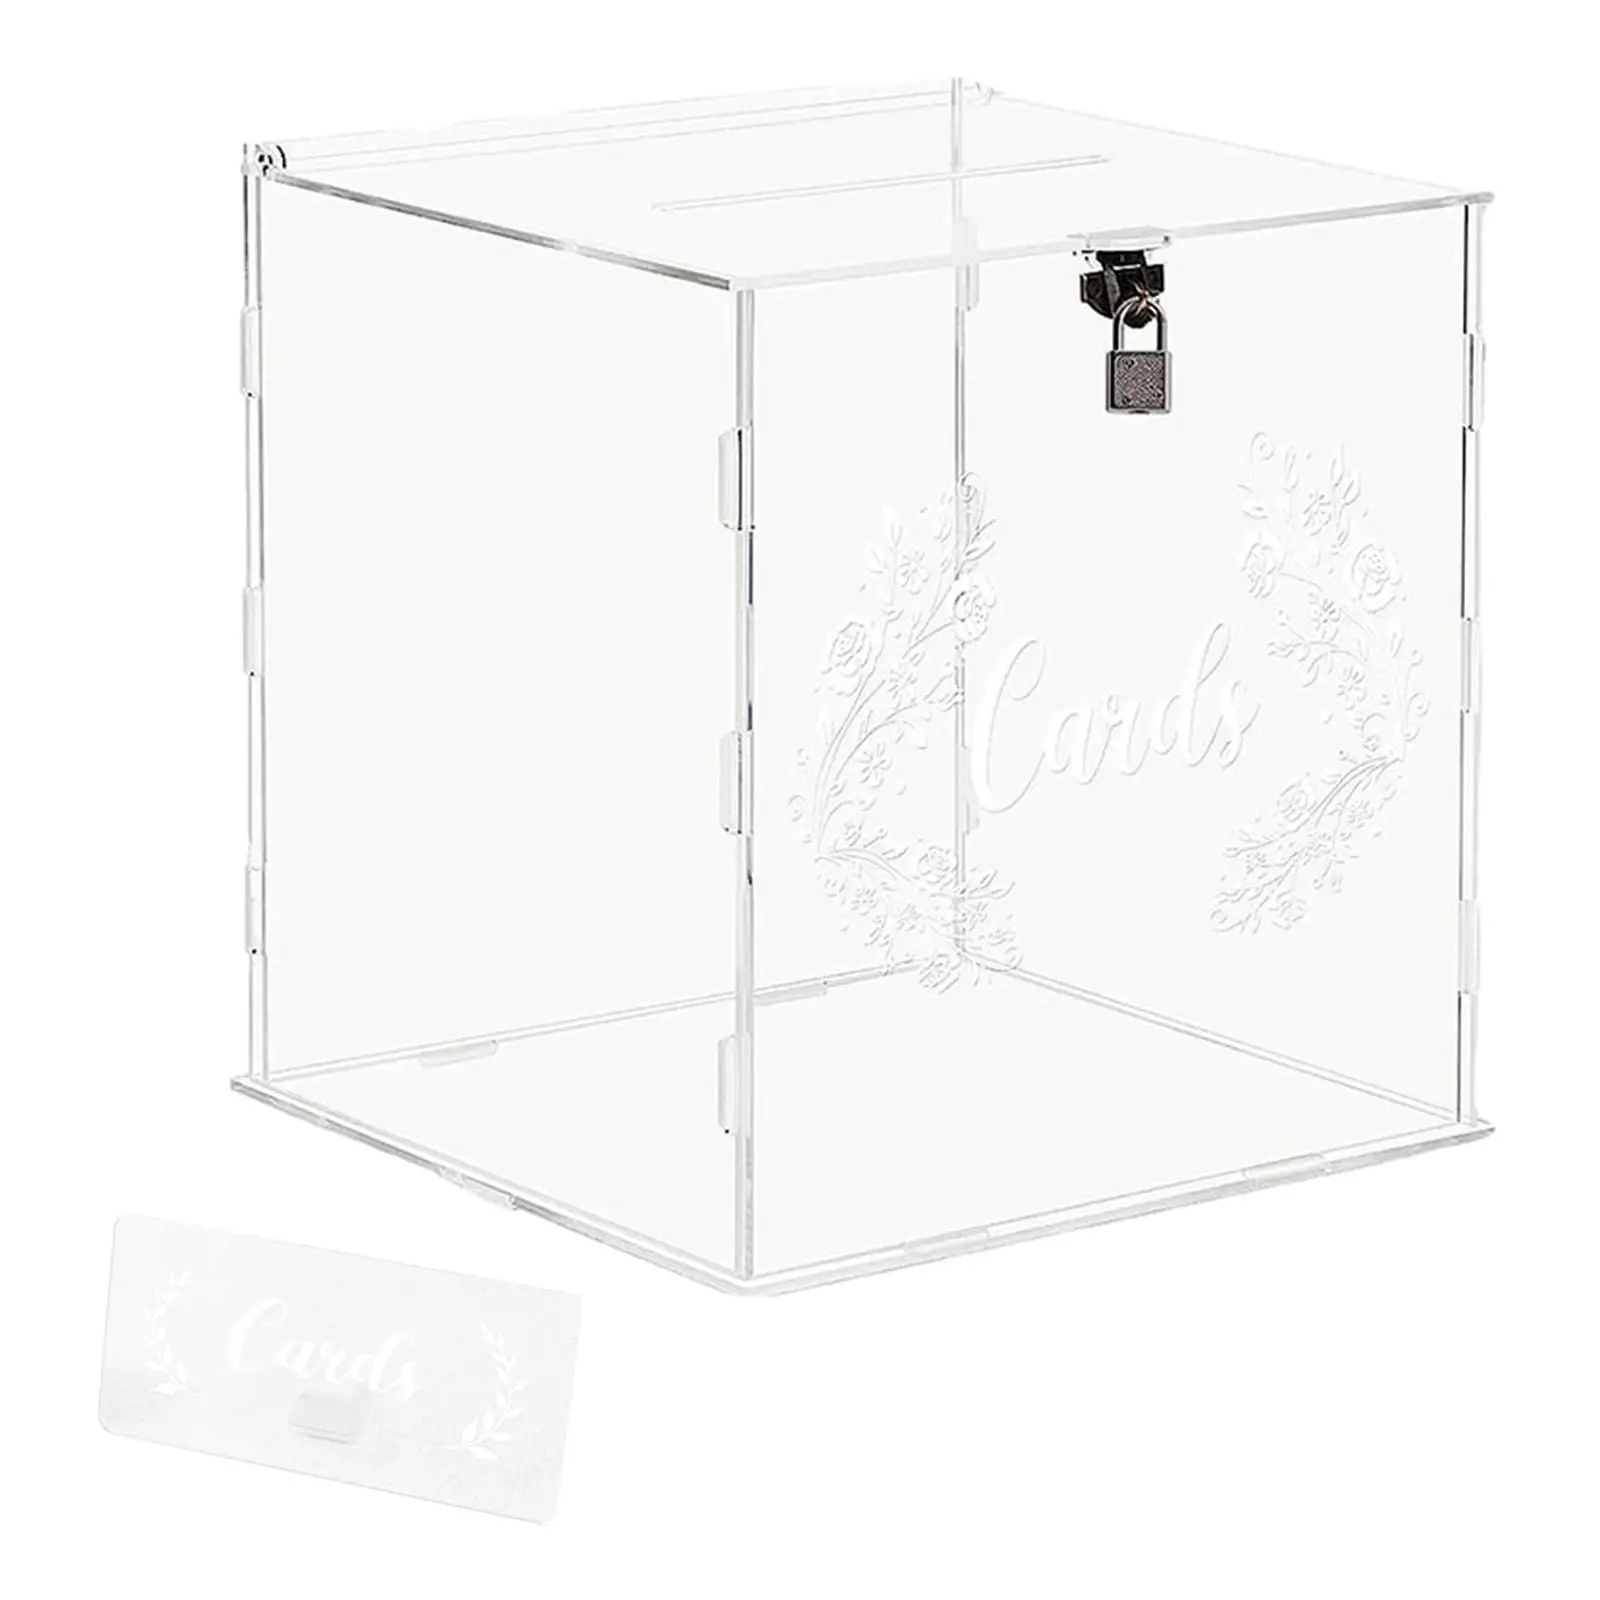 Acrylic Wedding Cards Box Gift Card Box Money Gift Holder Box with Lock for Parties Graduation Events Celebration Decoration